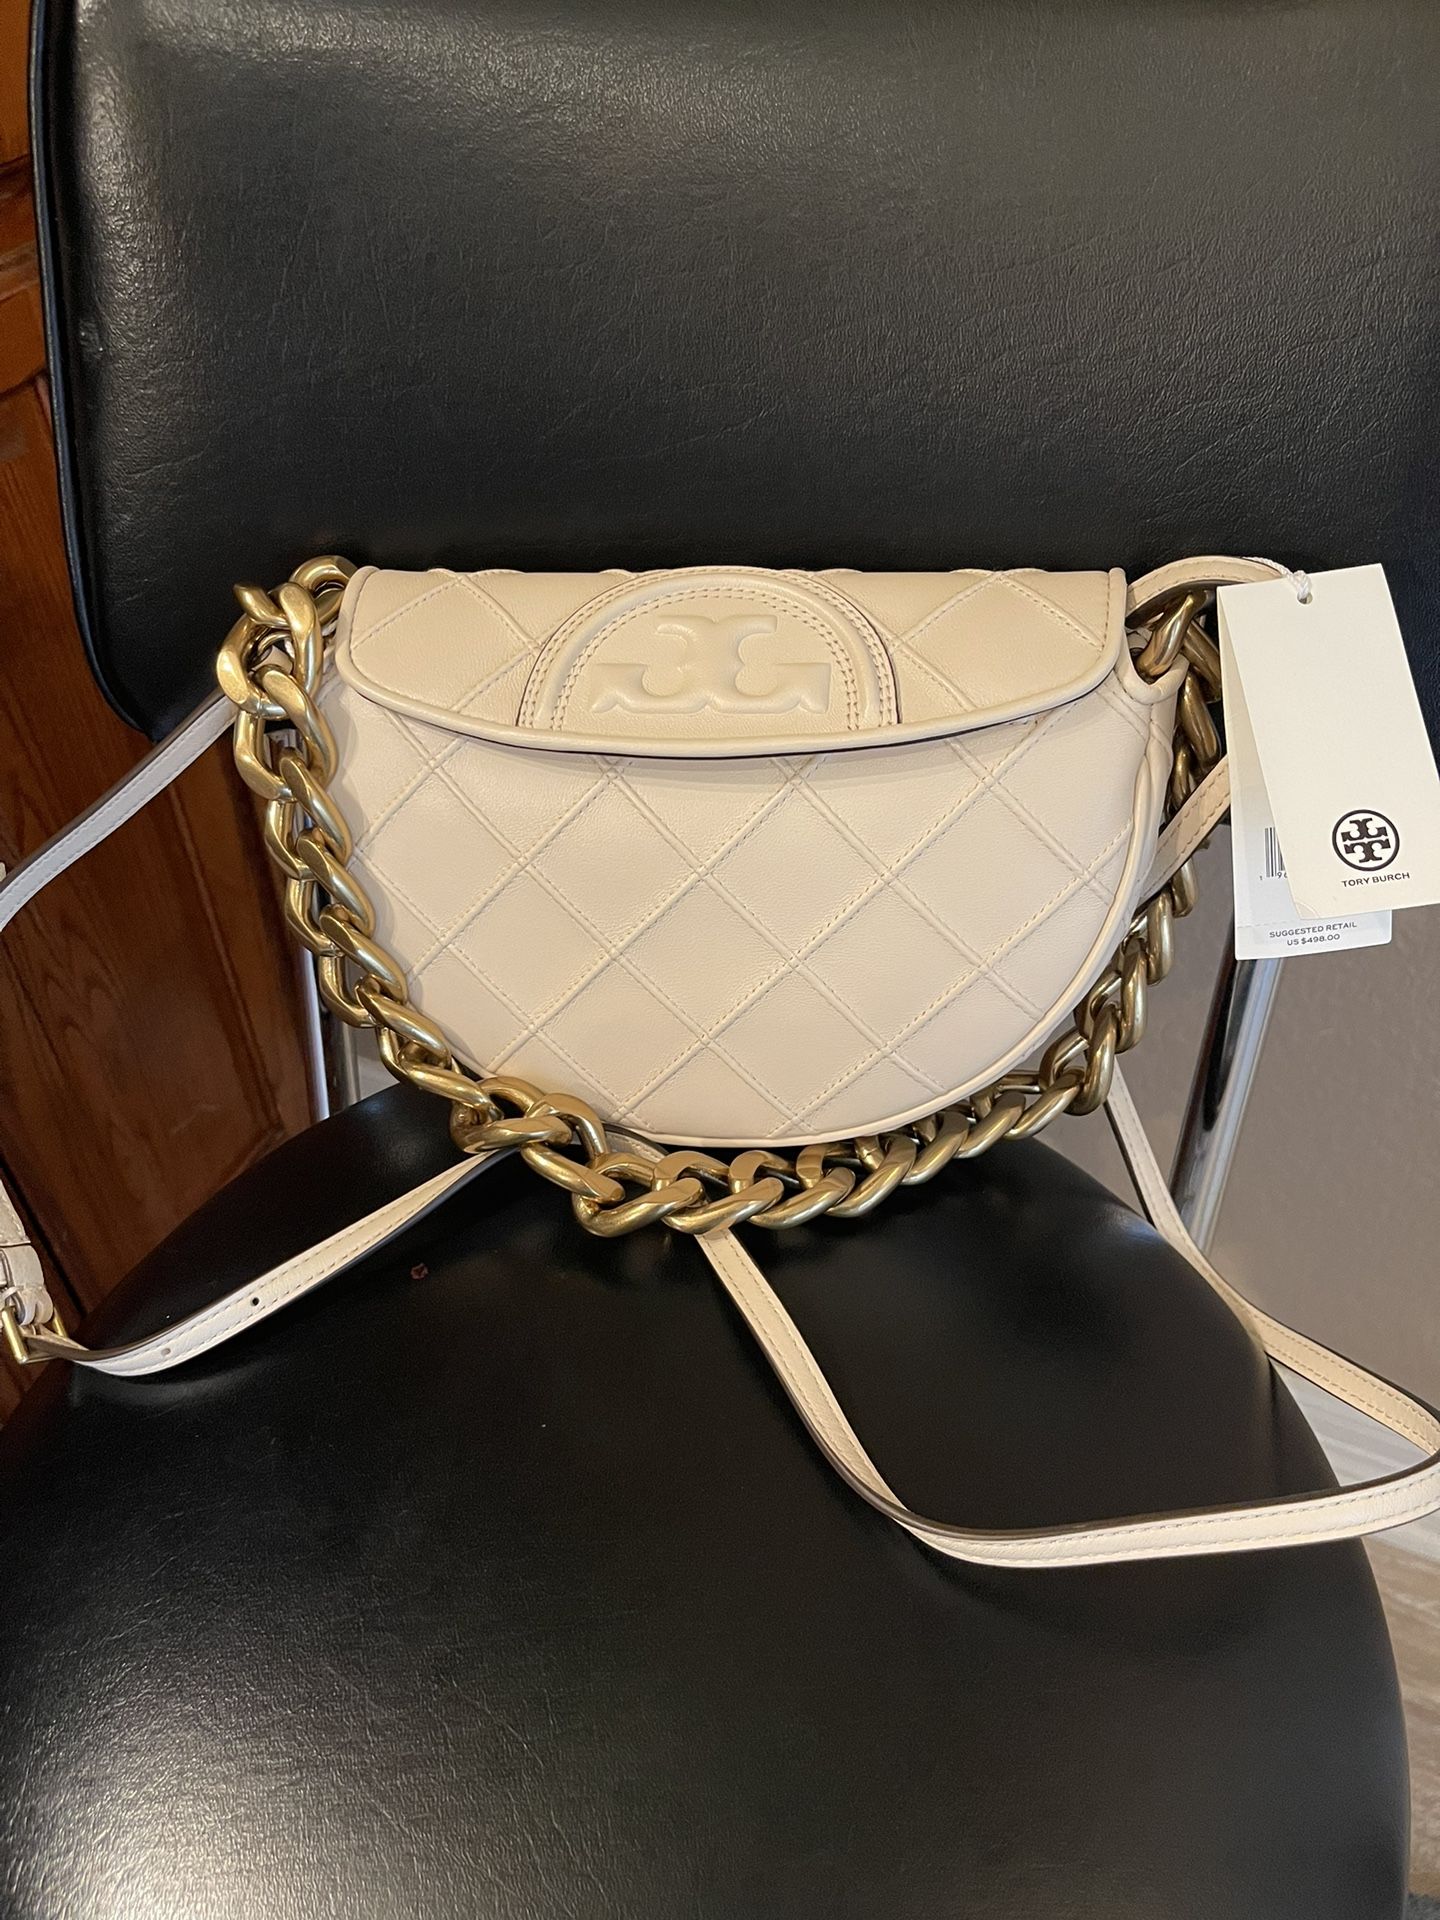 Authentic Tory Burch Purse New